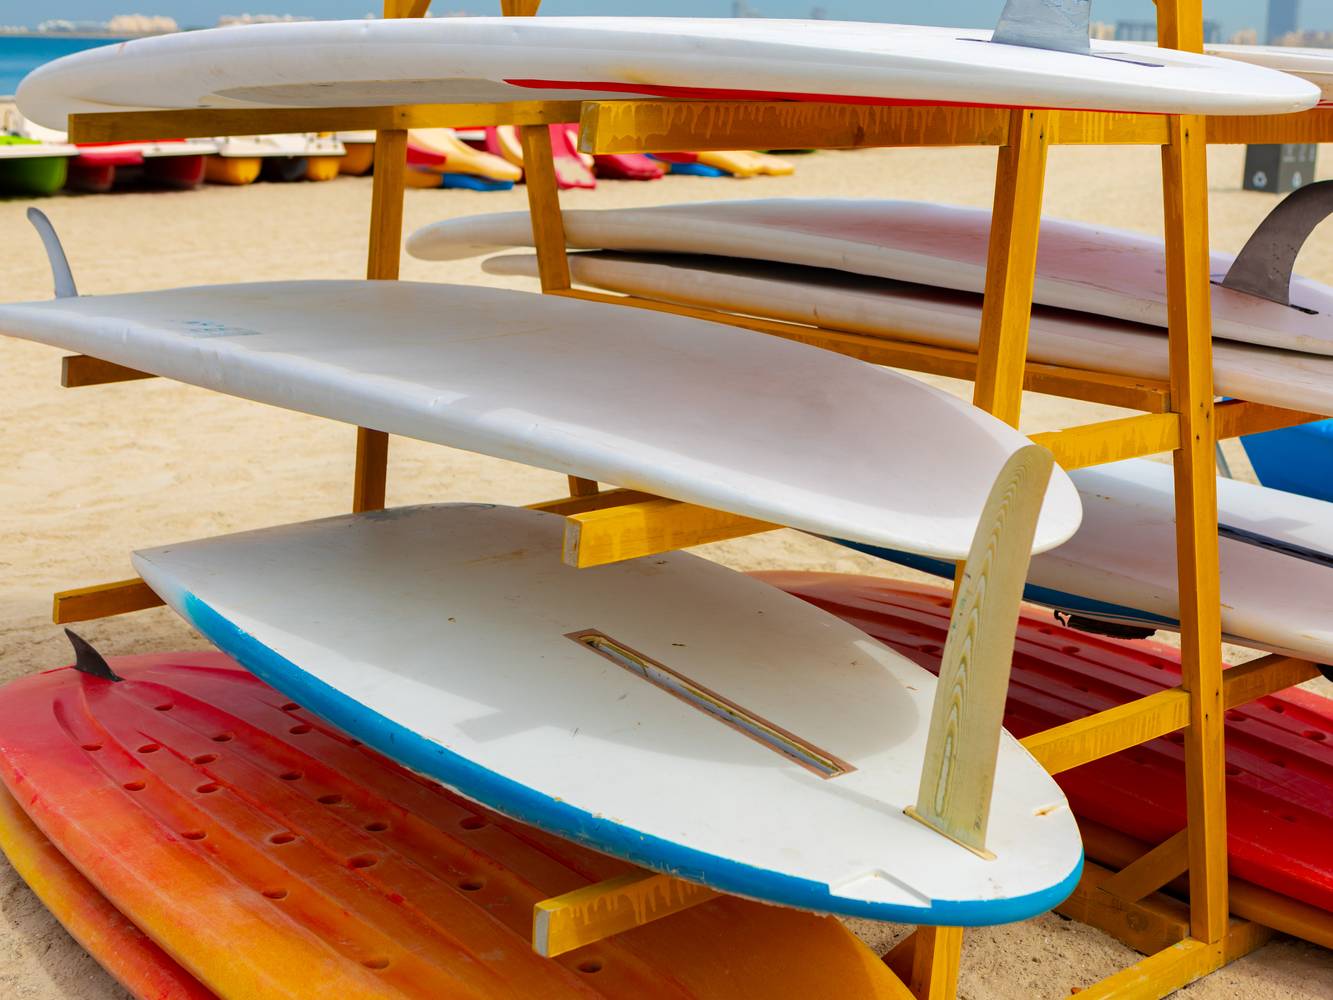 surfboards-stacked-on-the-rack-on-a-beach-2023-11-27-04-51-24-utc